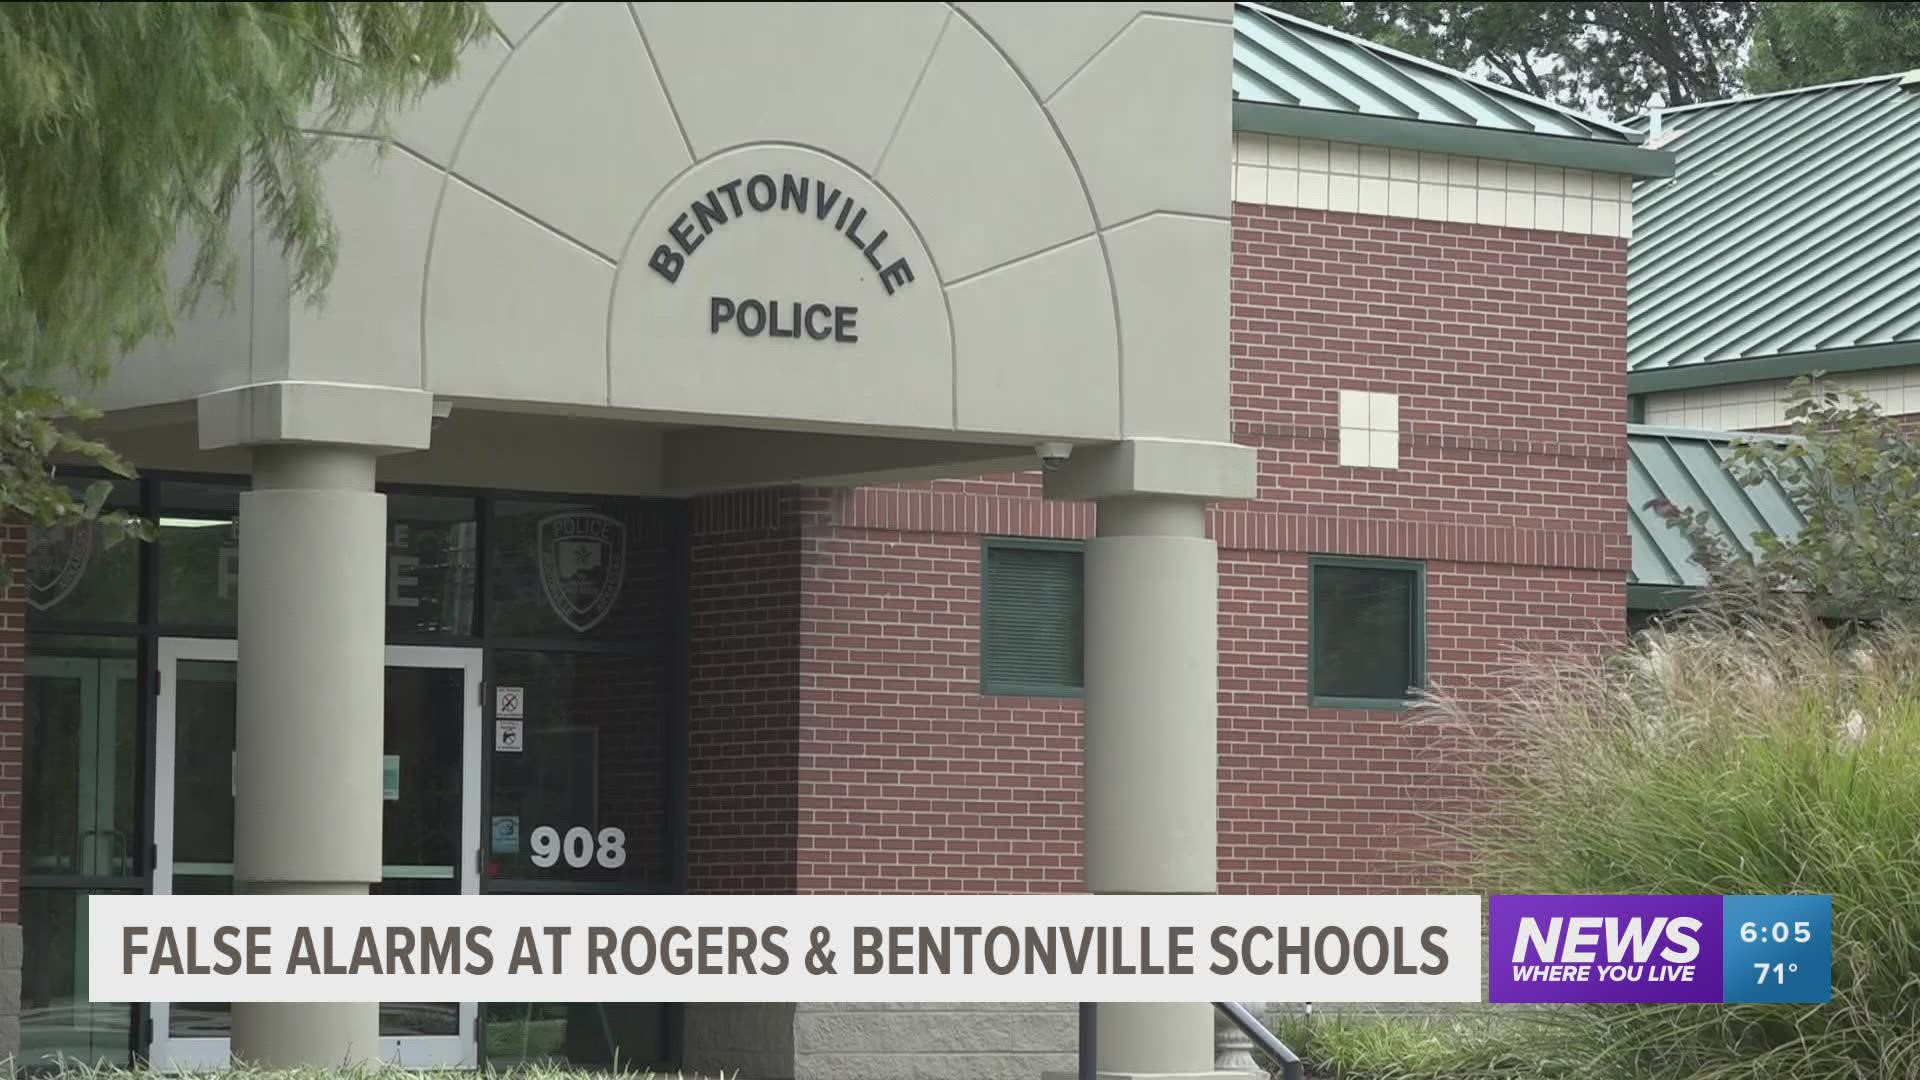 Reports of someone with a gun happened at Bentonville and Rogers High Schools.